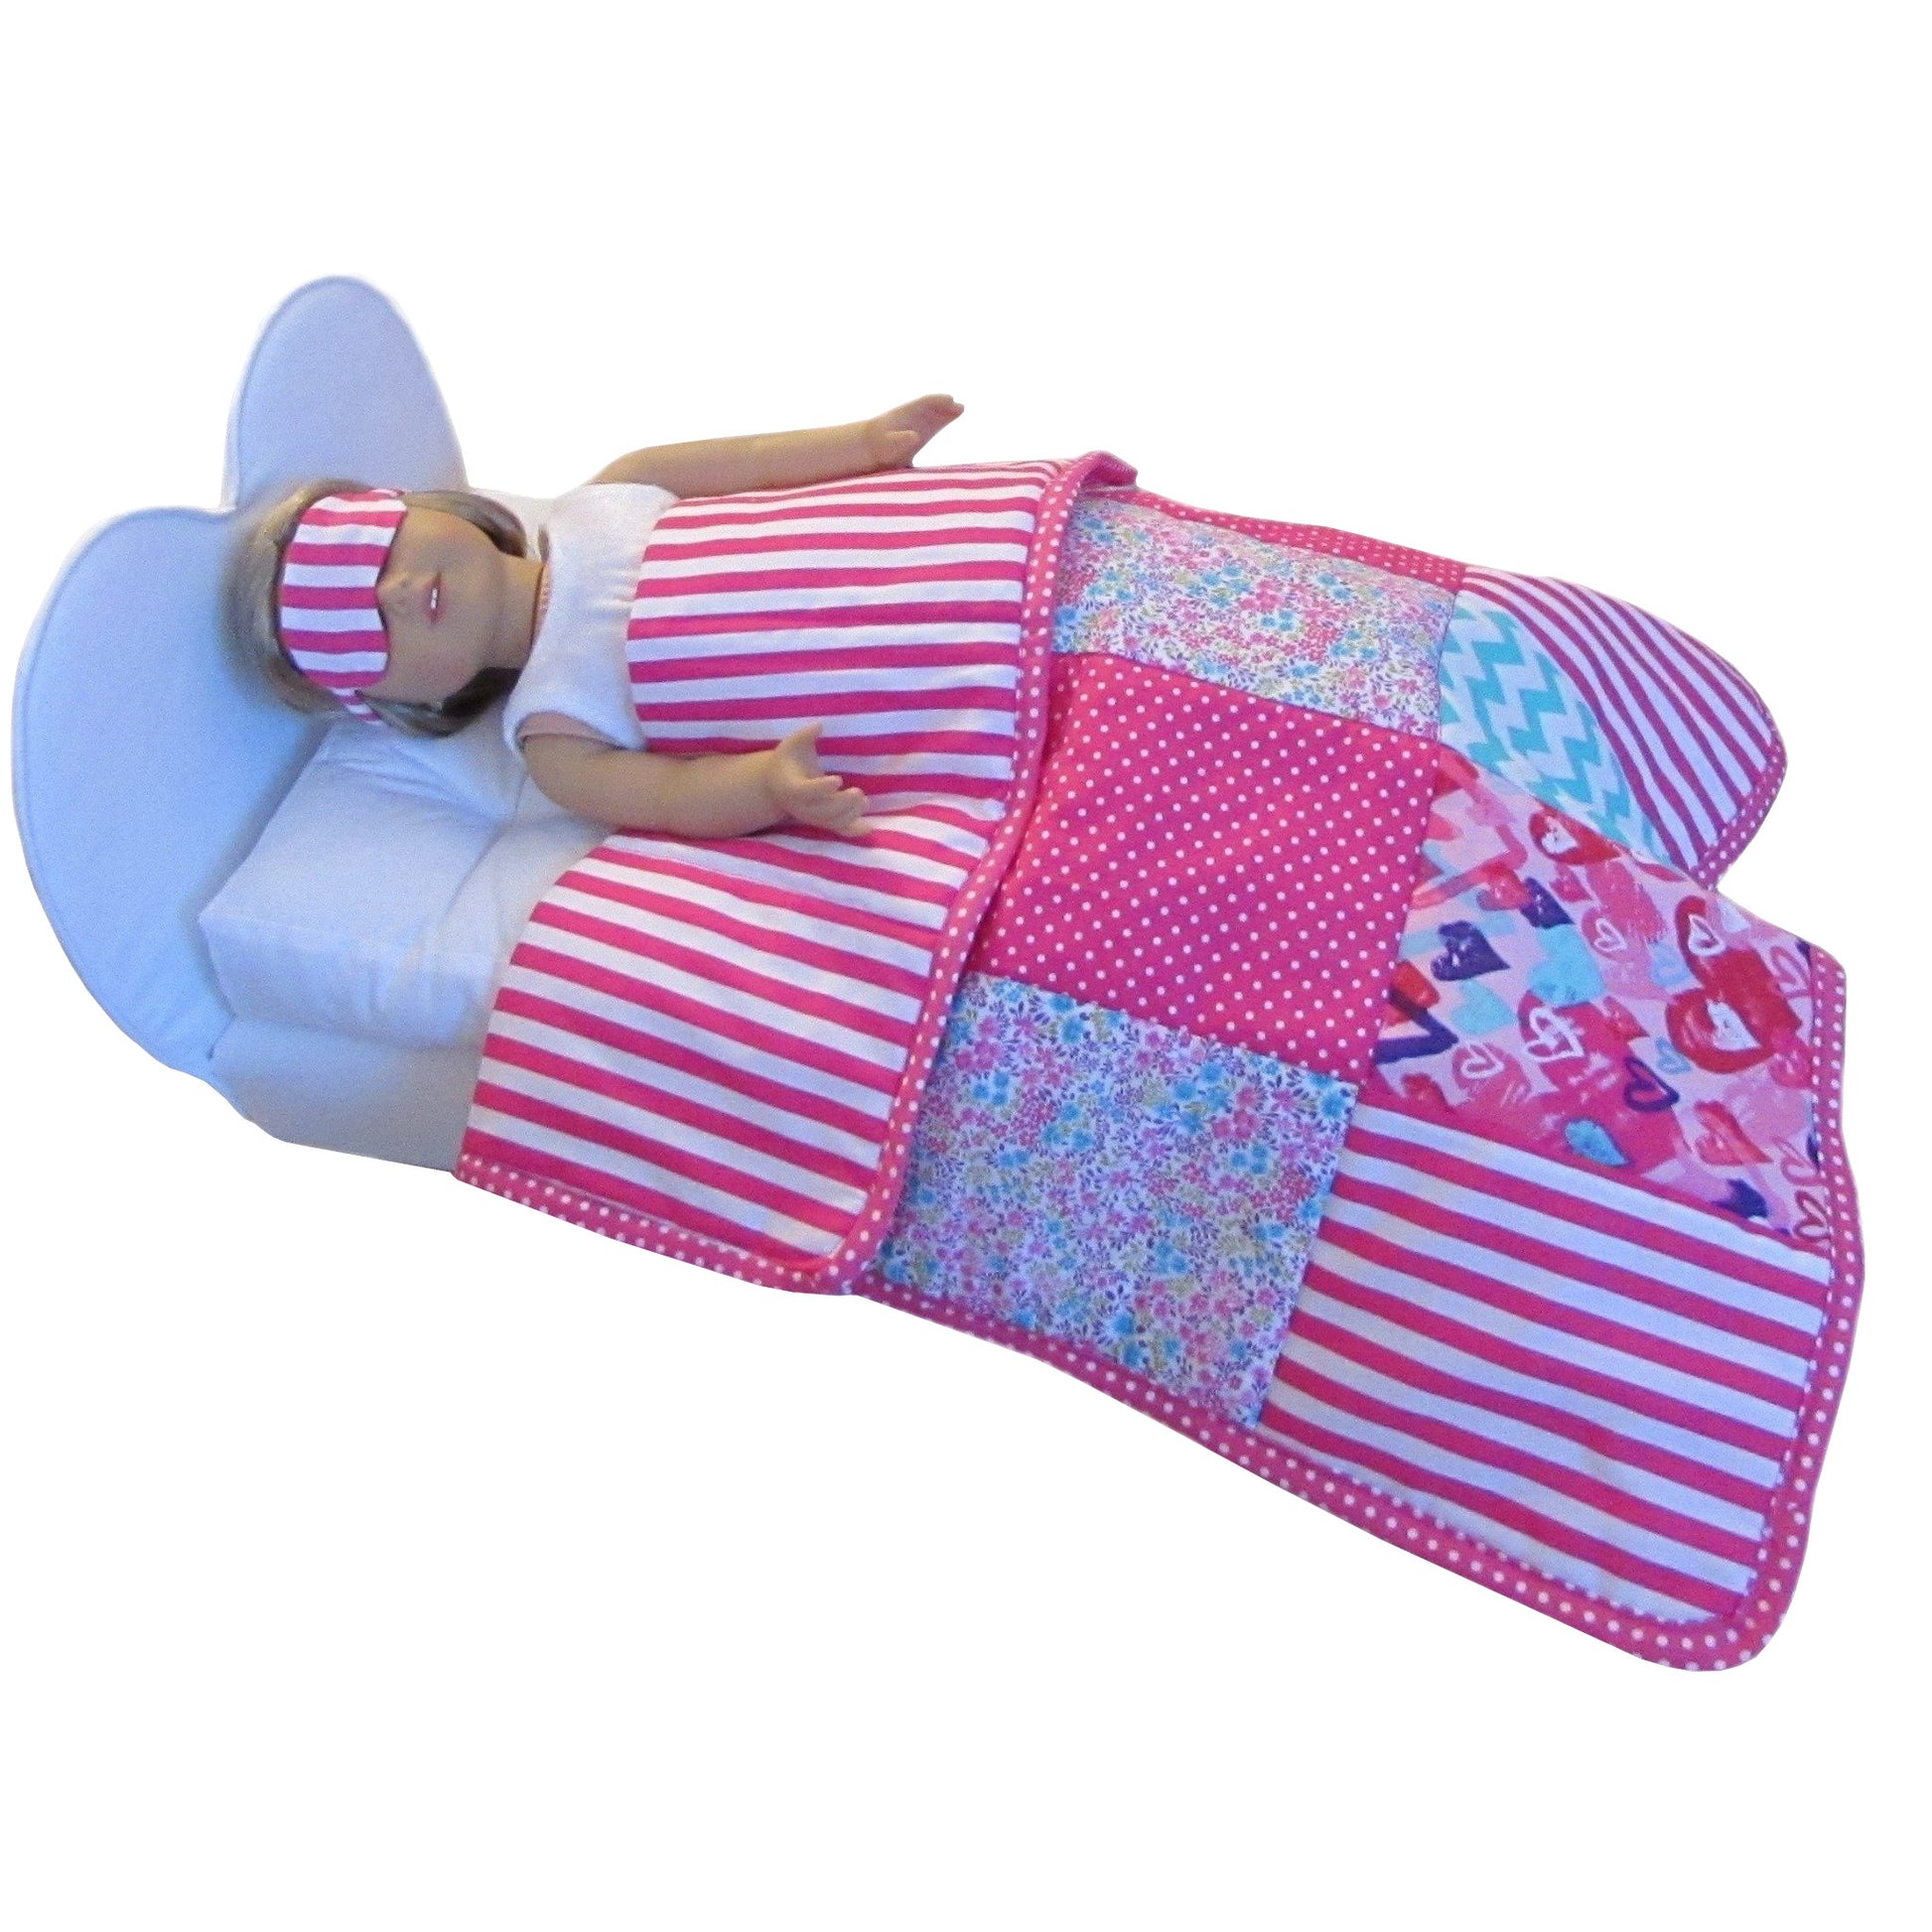 Pink and White Stripes Doll Sleep Mask, White Heart Doll Bed, Doll, Quilt for 18-inch dolls